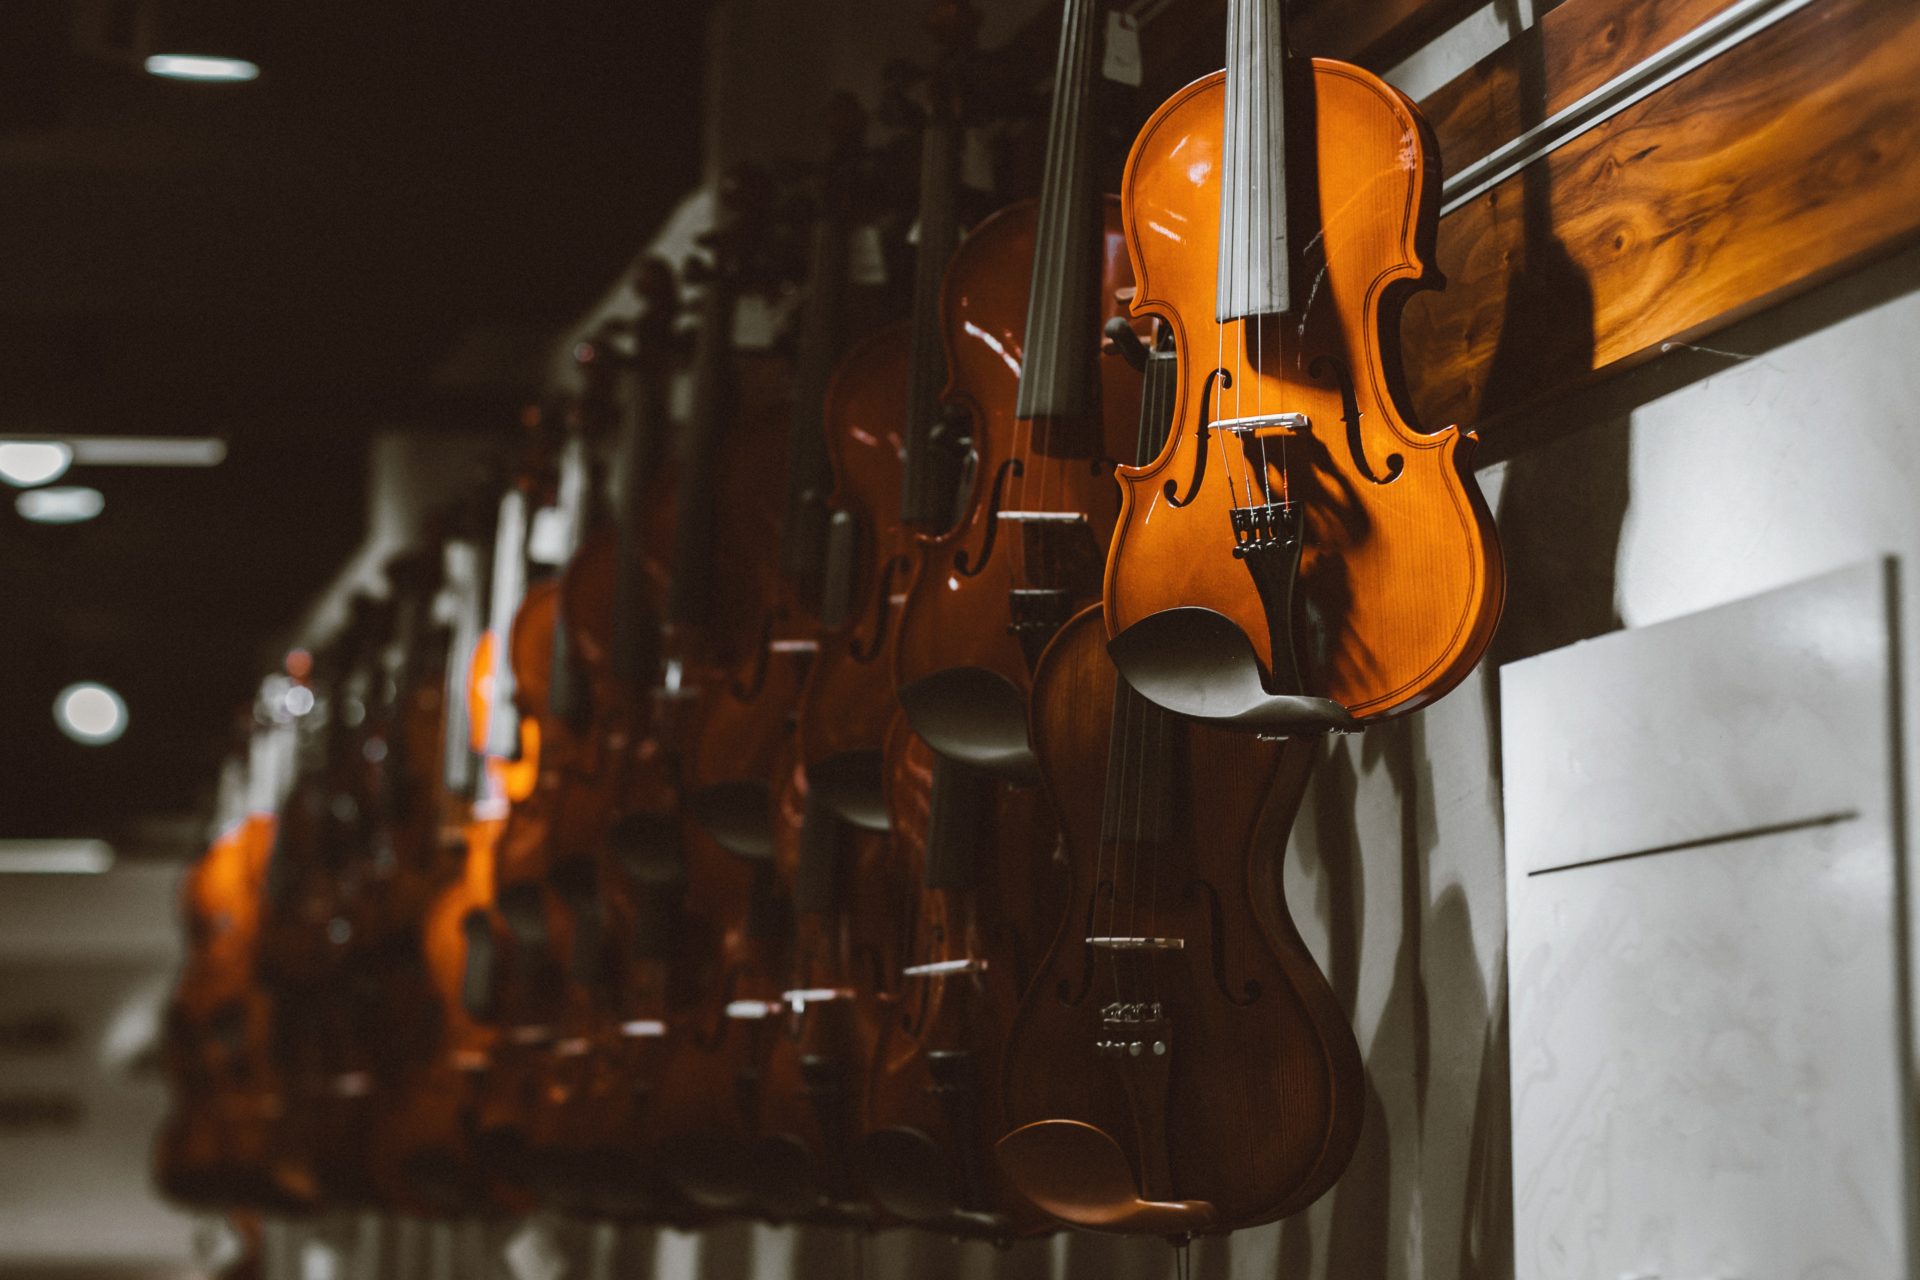 How Much Do Beginner Violins Cost?